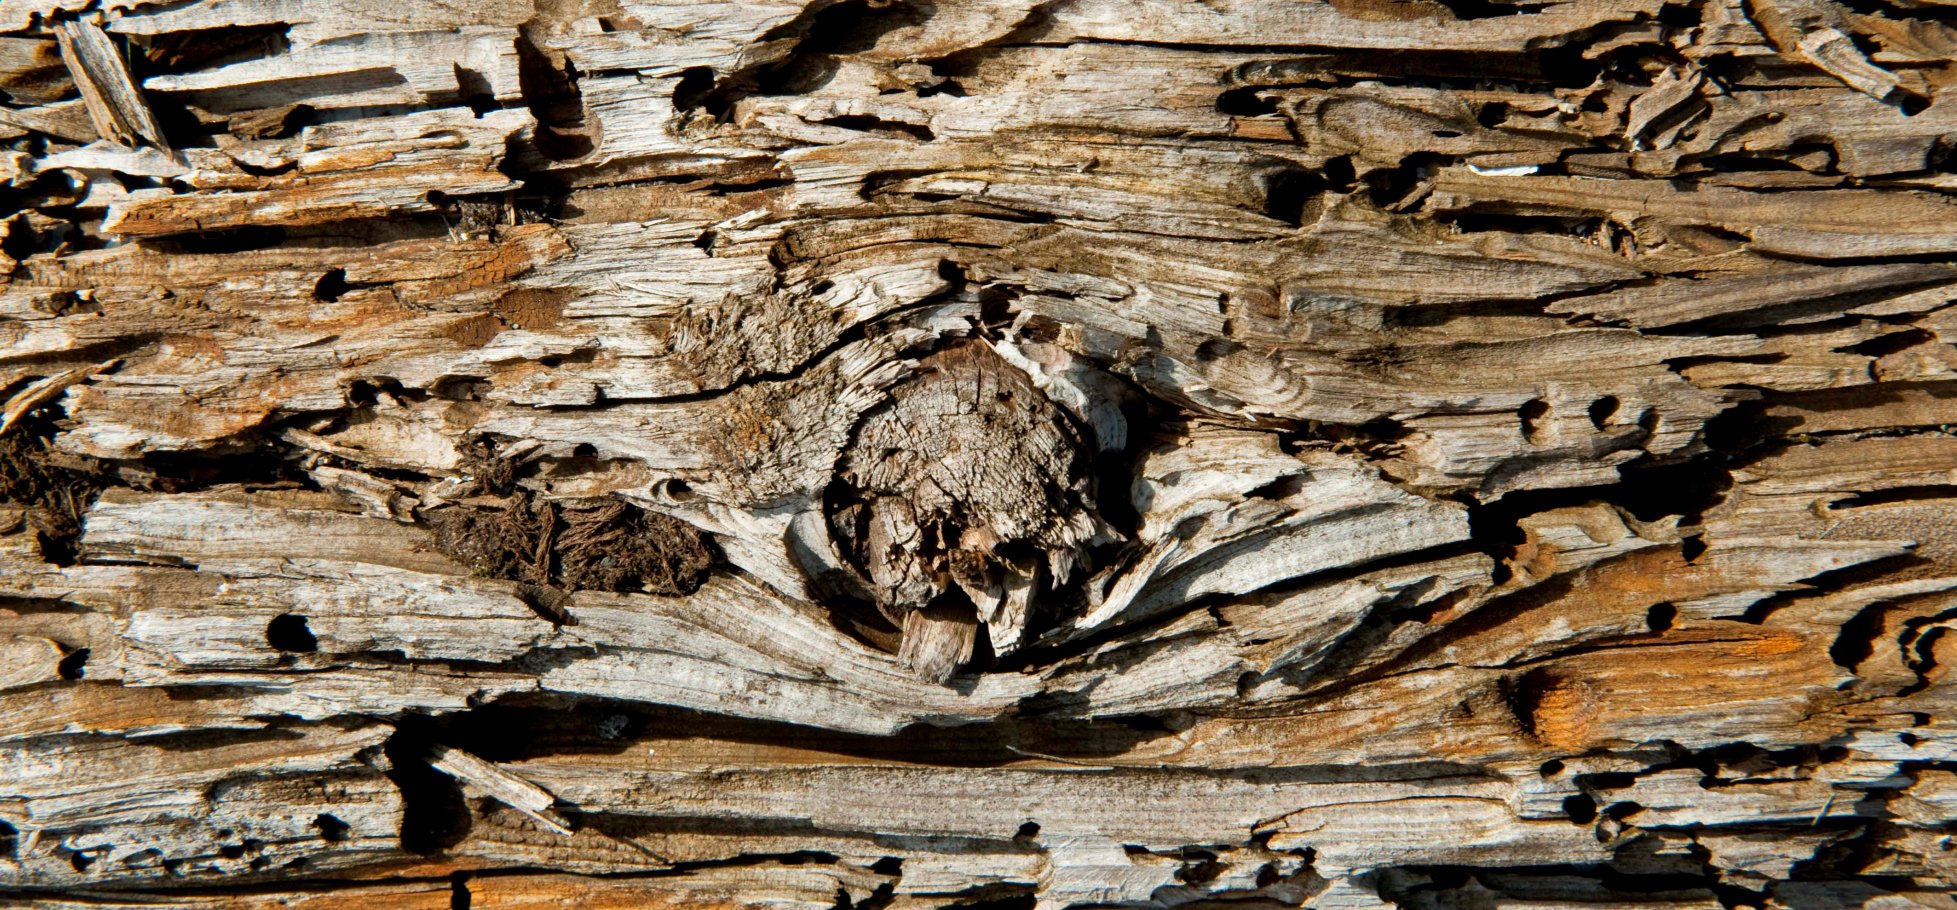 Detail of a timber with holes made by beetles